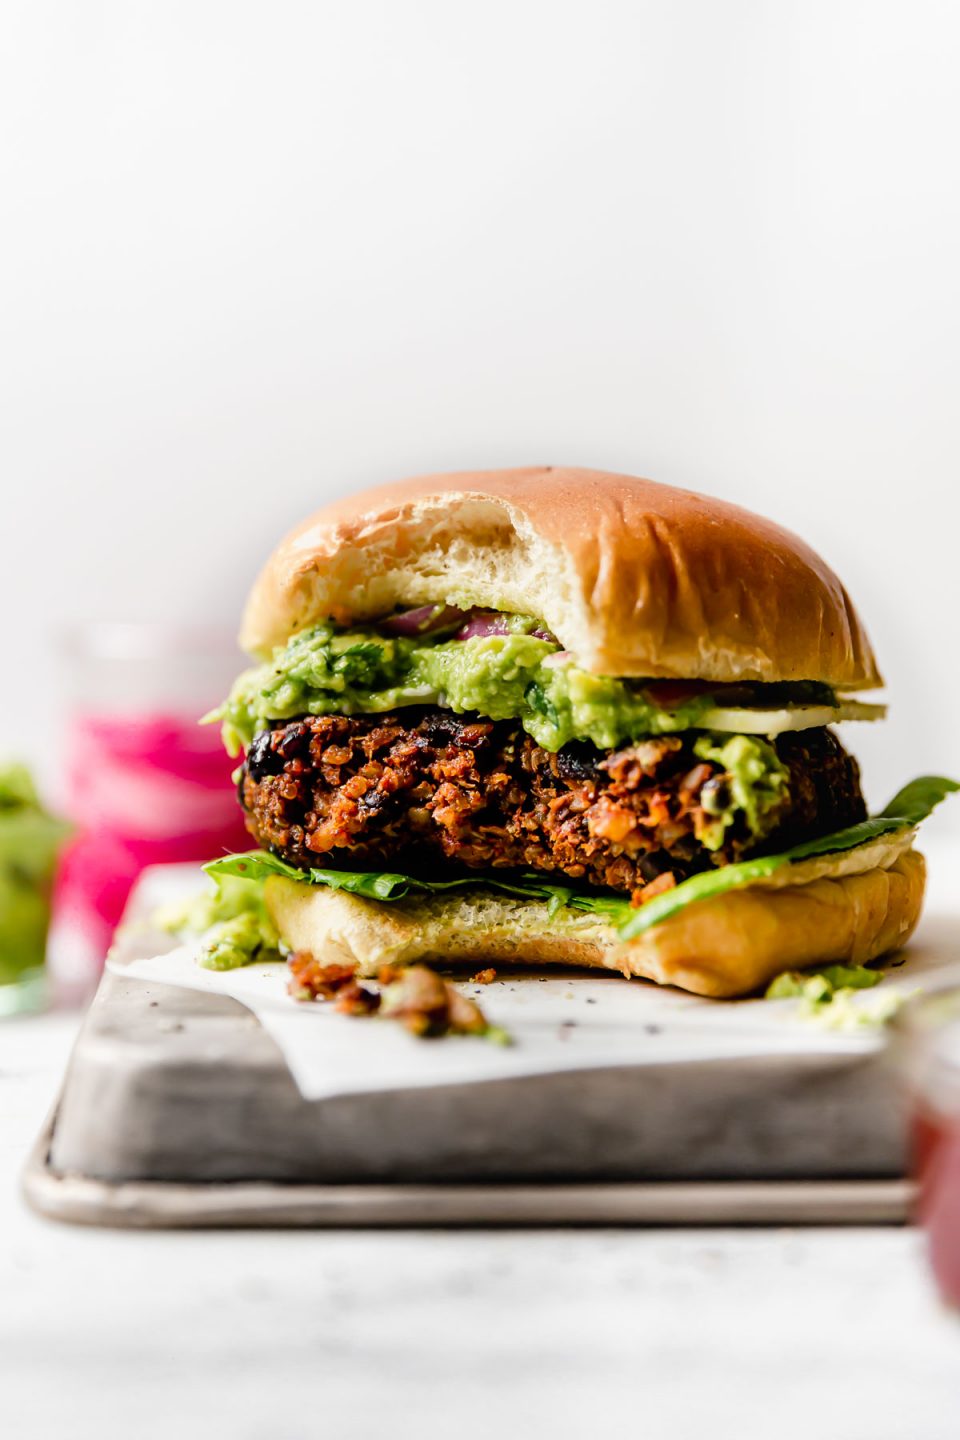 Grilled Black Bean Burgers with a large bite taken out of it. The burger is placed on a small metal tray, with jars of guacamole & pickled red onions in the background.